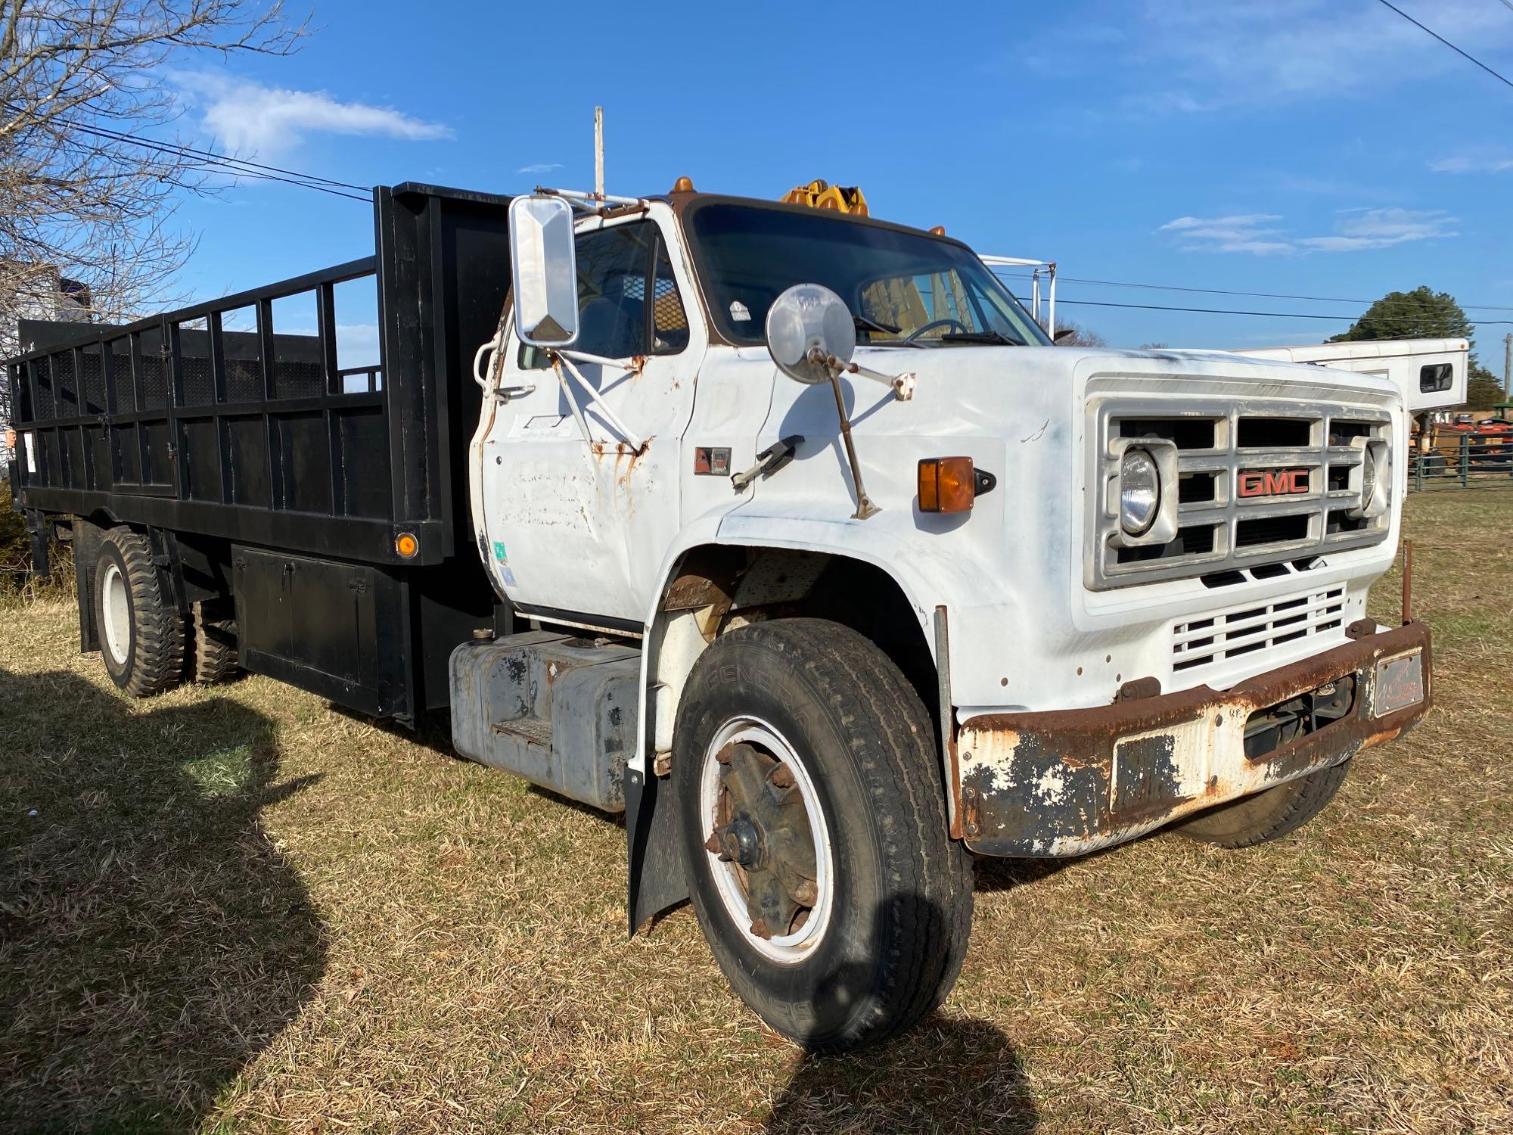 Image for 1989 GMC C7000 20 Flat Bed w/Lift Gate Truck. VIN:  LGDL71F4KV500537 Mileage Showing: 098,320